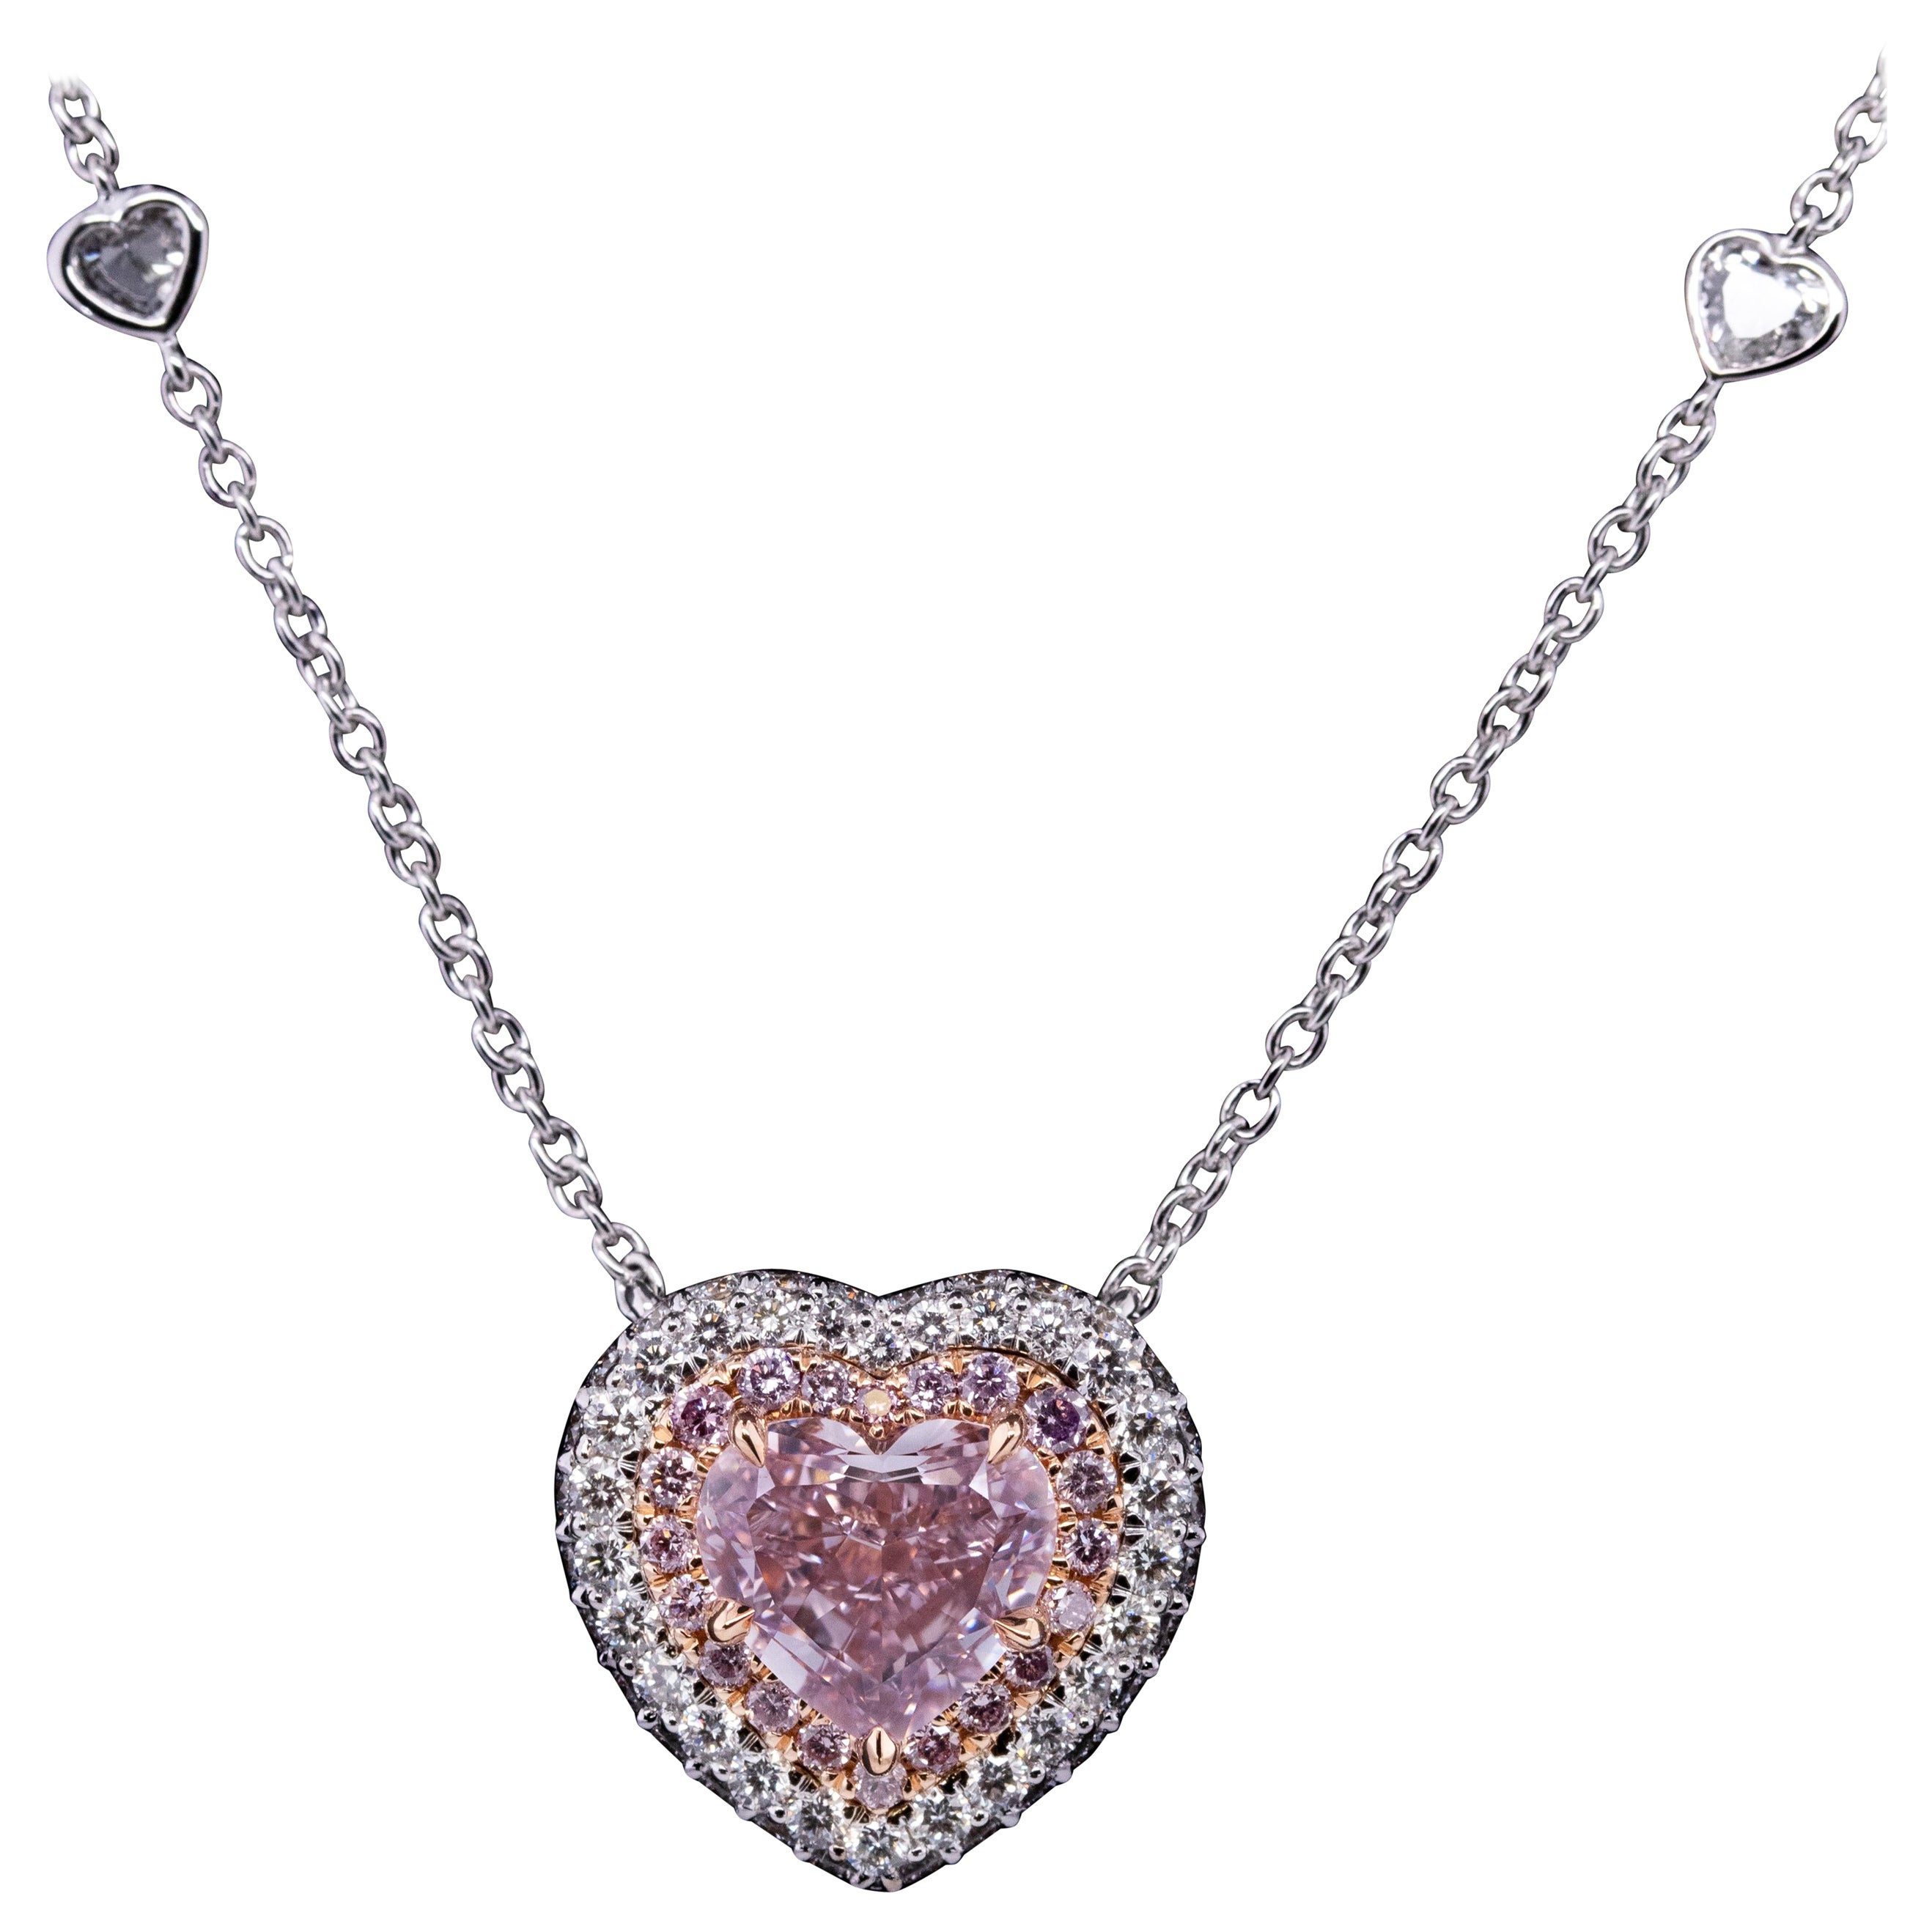 GIA Certified 2.16ct Natural Fancy Pink Heart Shape Diamond Necklace For Sale